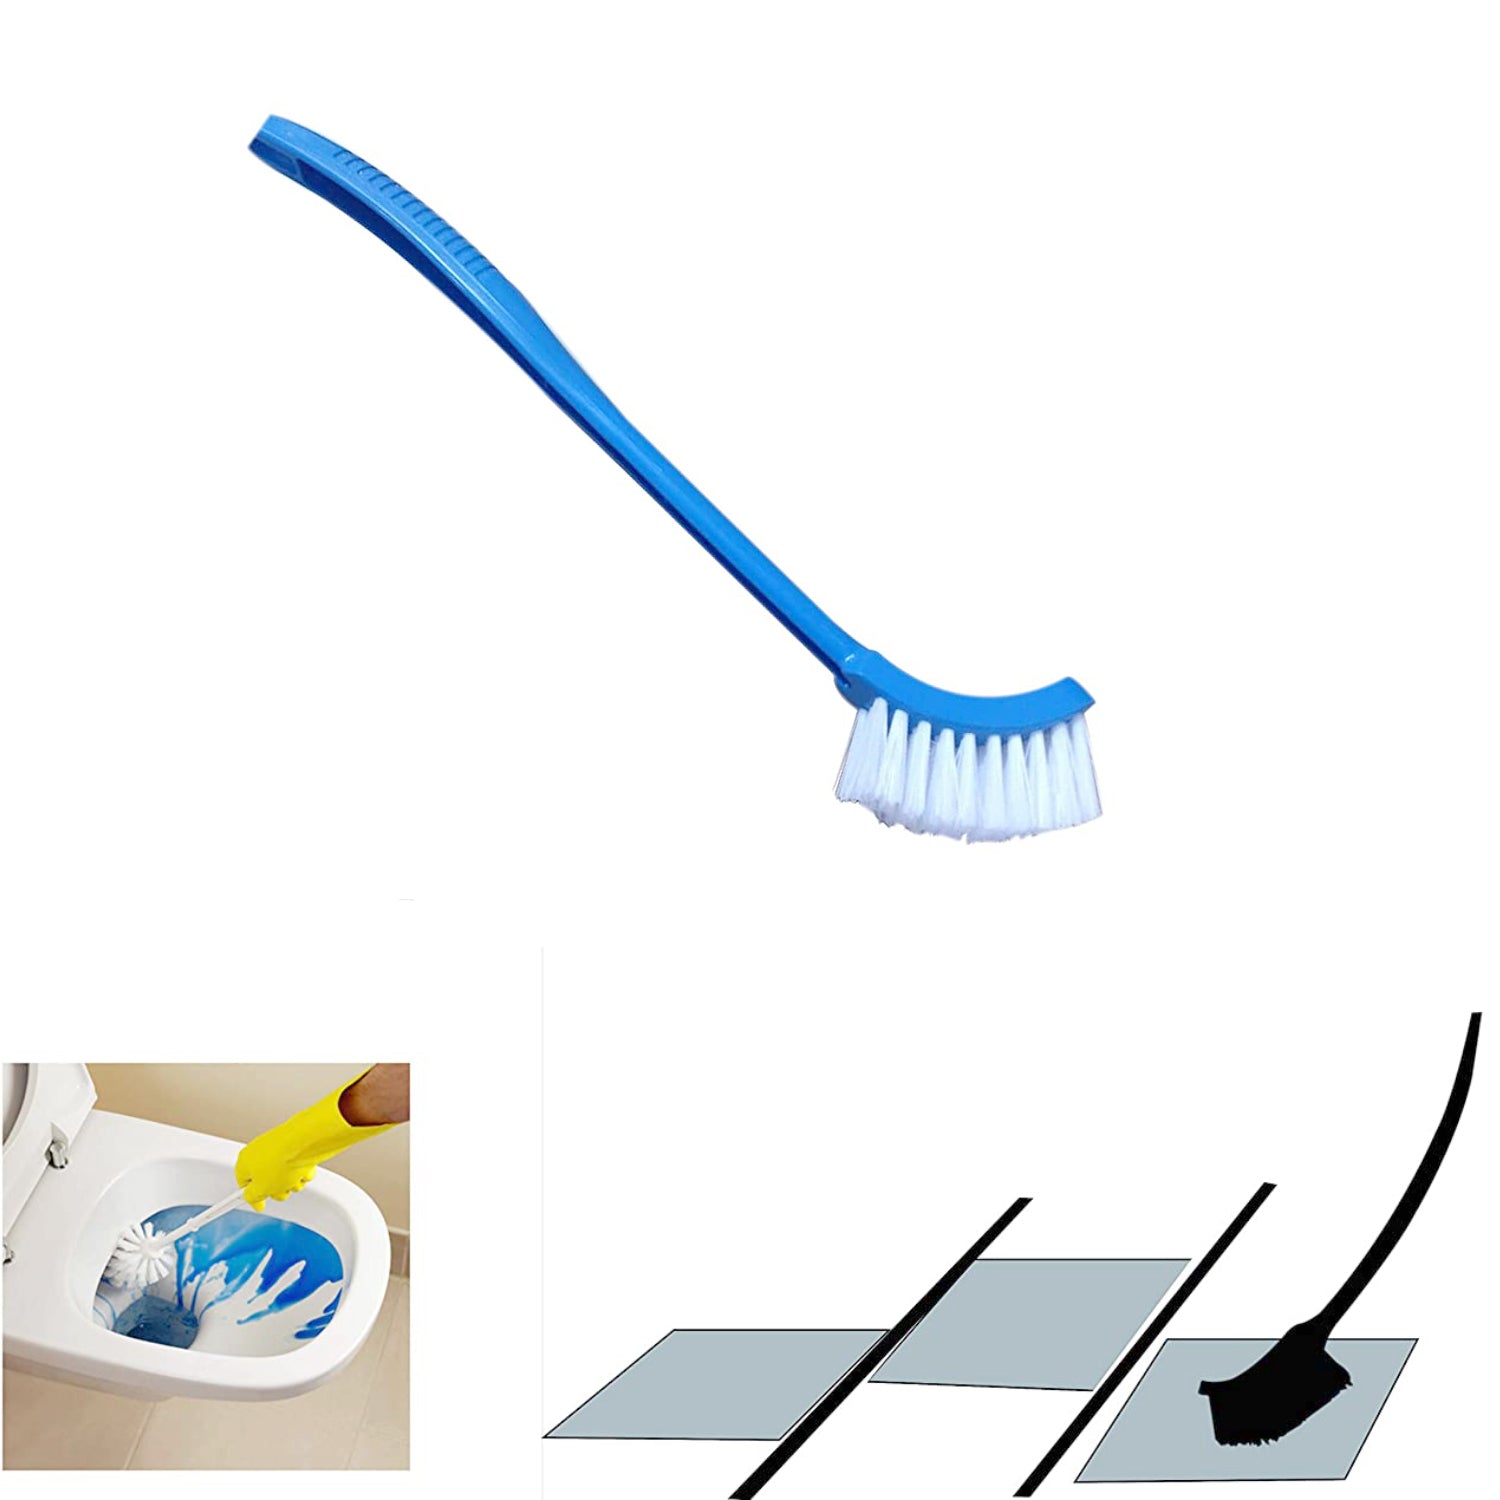 1291 Single Sided Bristle Plastic Toilet Cleaning Brush - India, 0.24 kgs